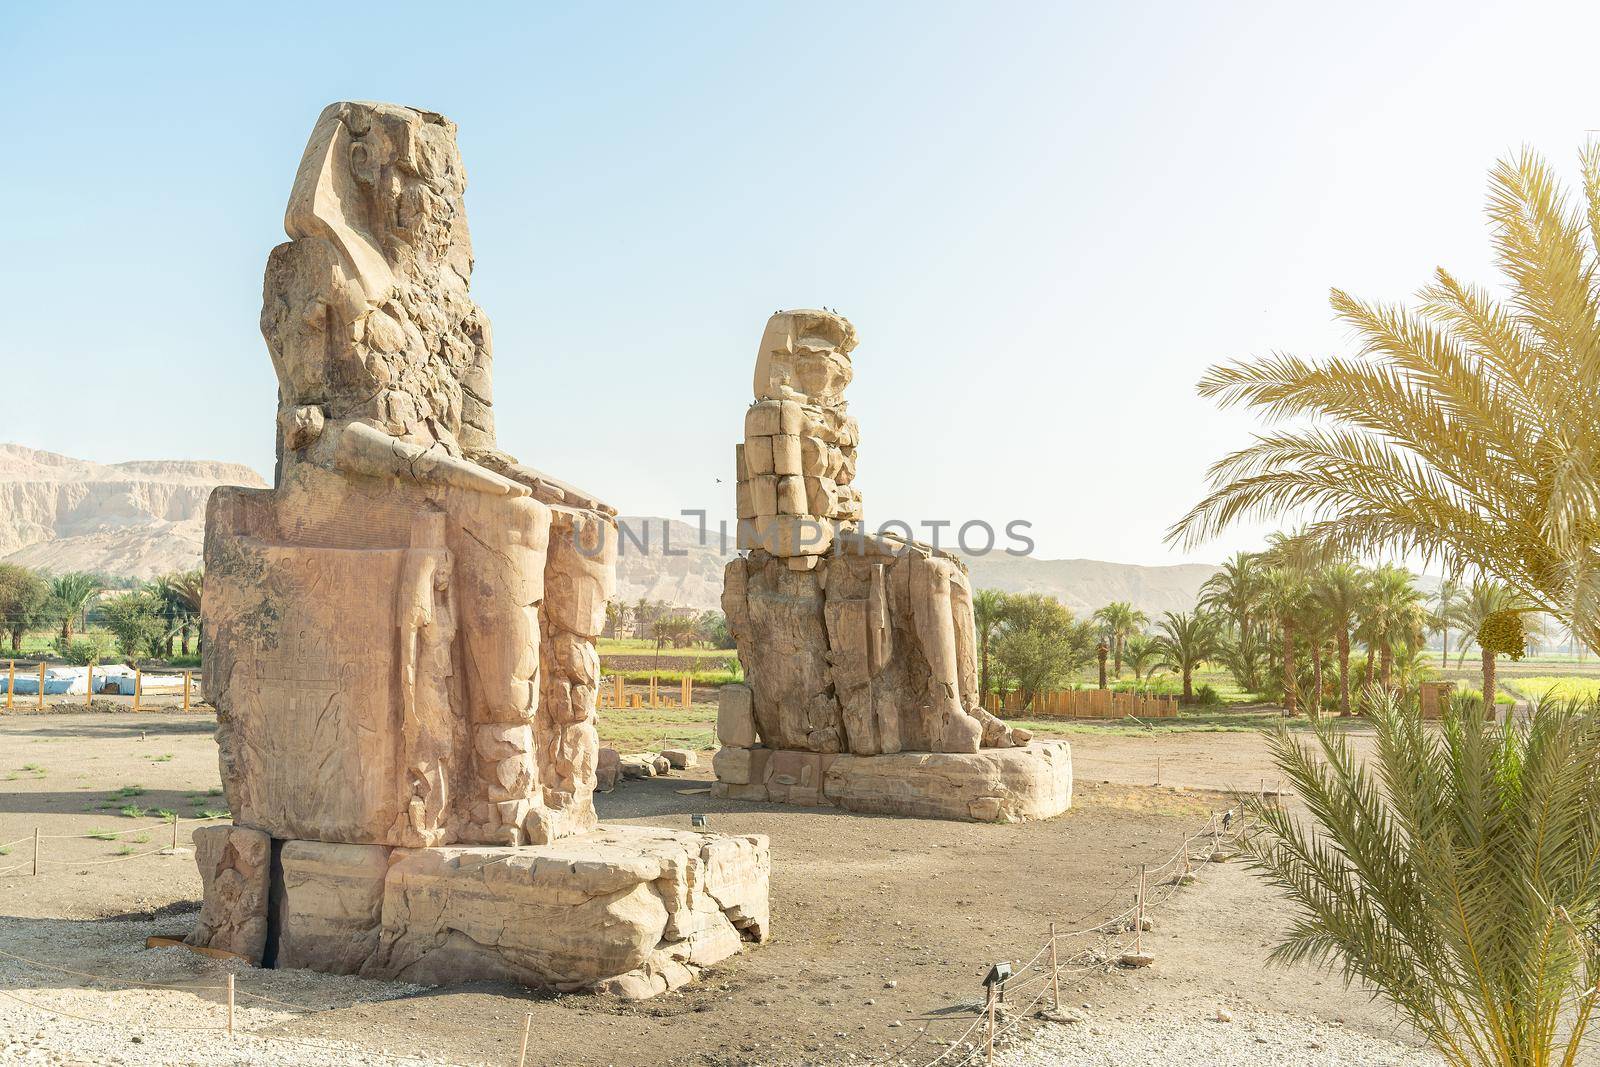 Two statues of the colossus of Memnon of the Pharaoh Amenophis III